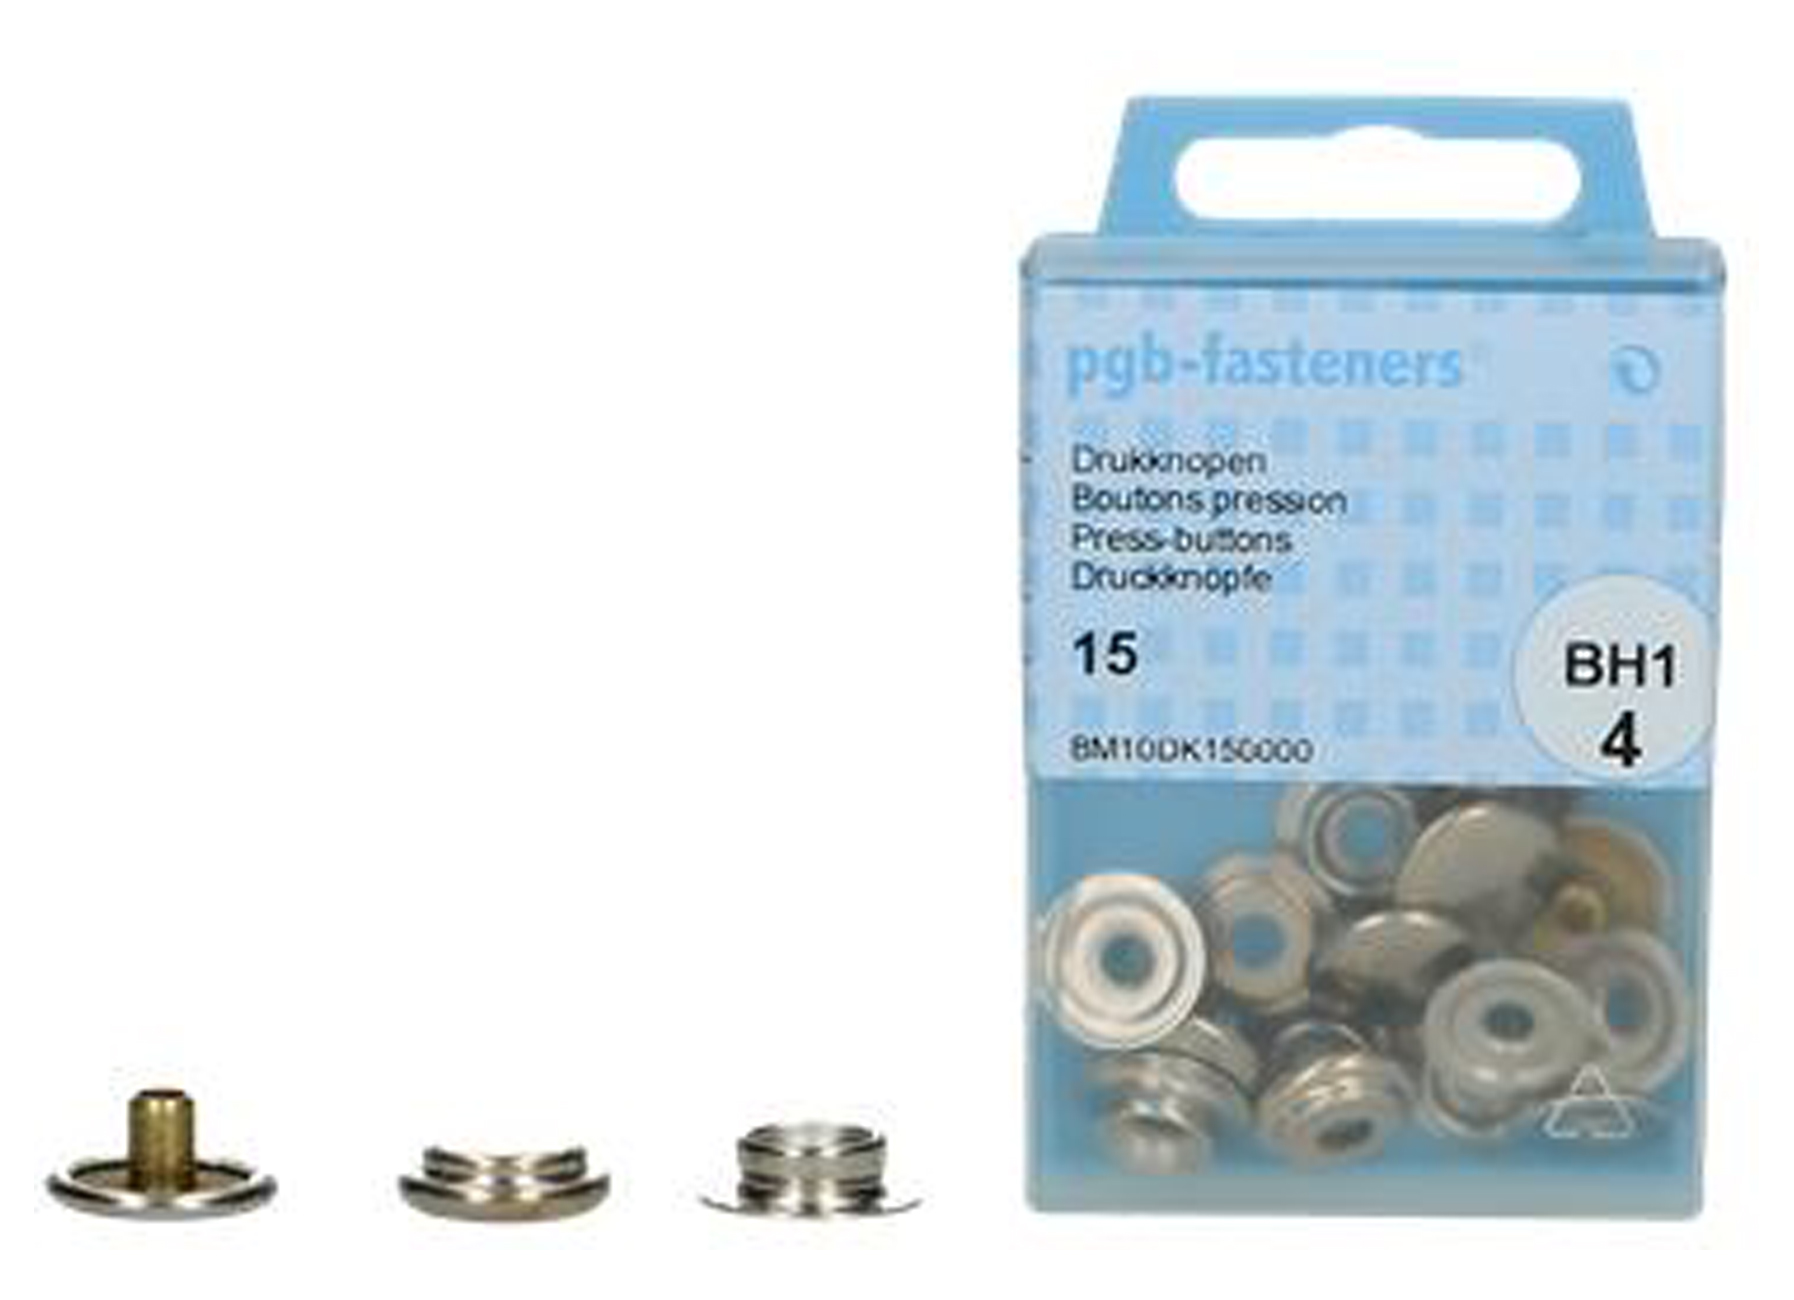 BOUTONS-PRESSION 15MM LAITON BLISTER 3 PC